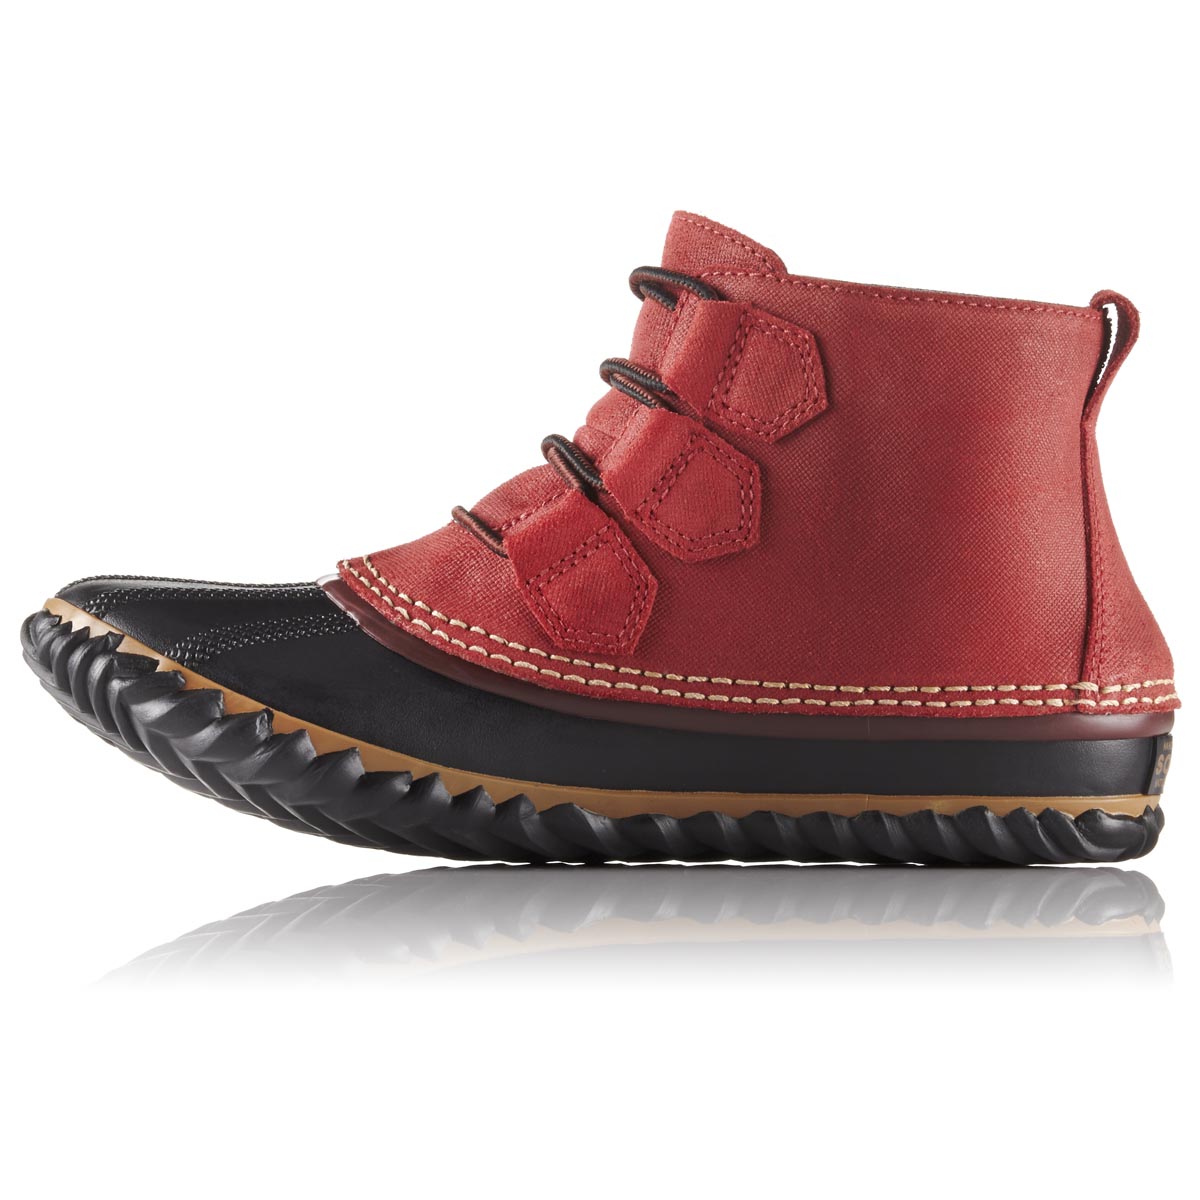 Sorel Women's Out 'N About Leather Gypsy